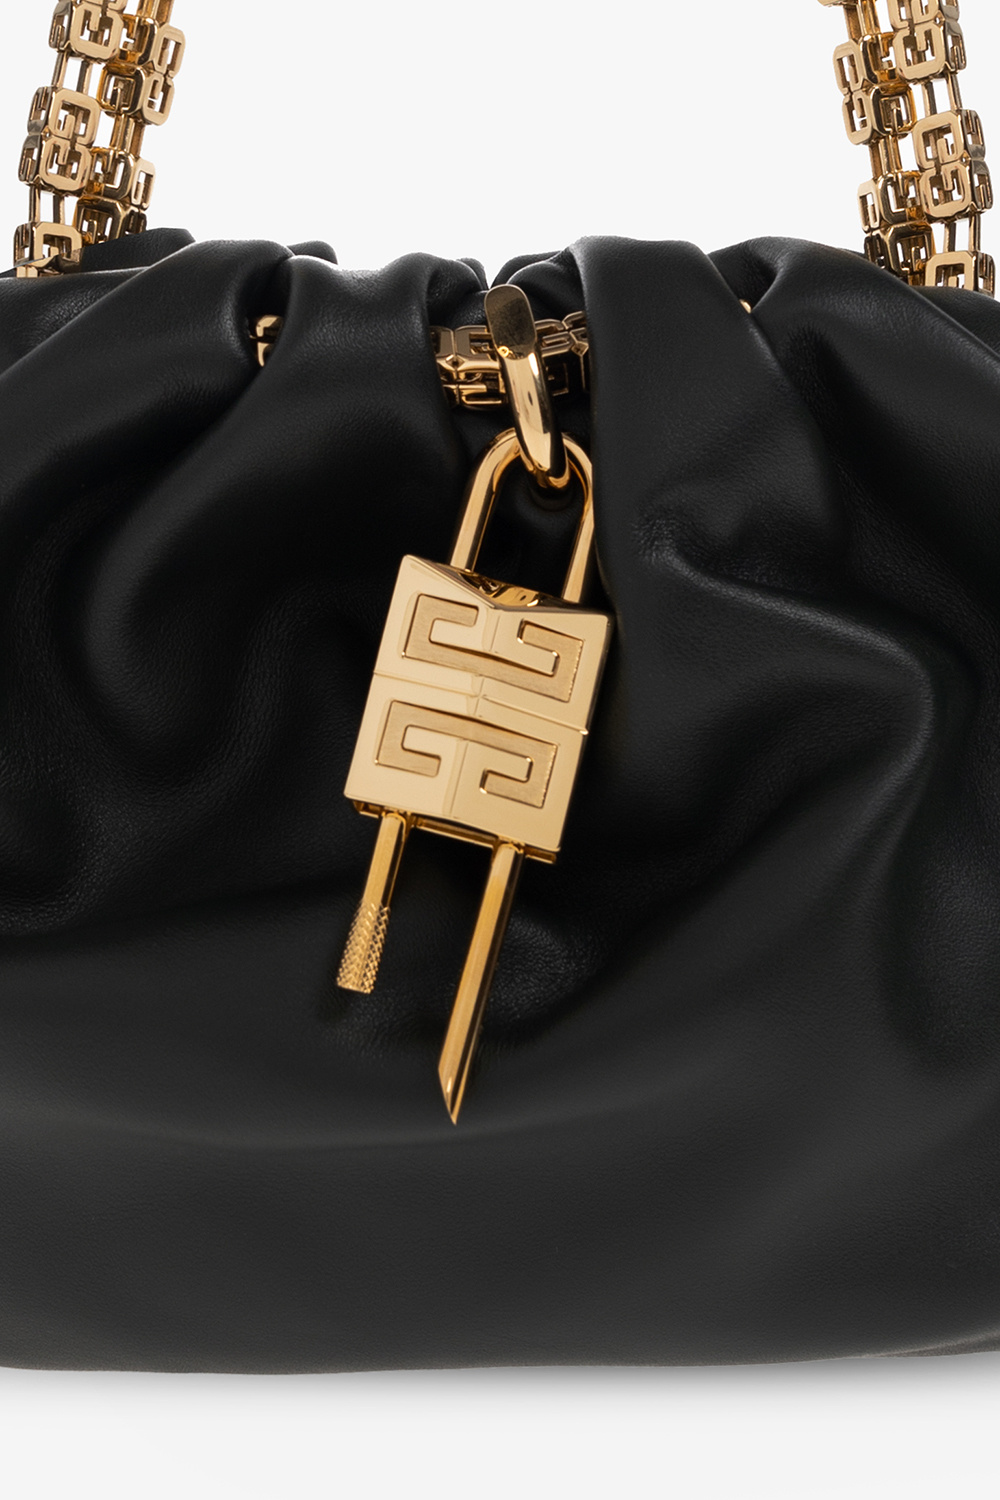 Givenchy's Kenny Bag is the New Couture It-Accessory